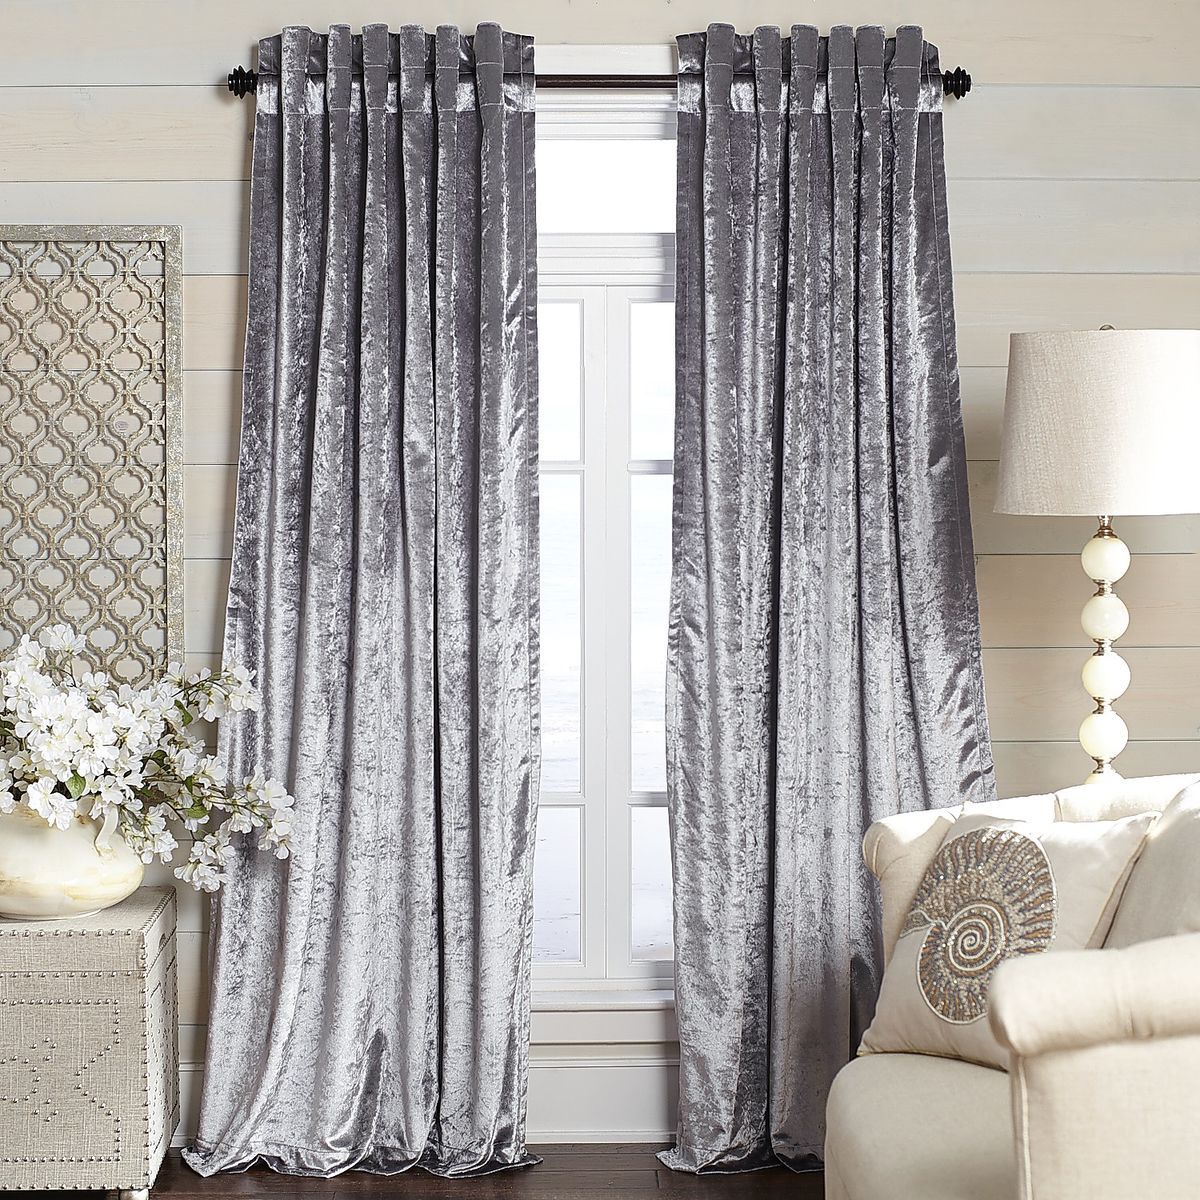 10 Eco-Friendly Curtain Options for a Greener Home